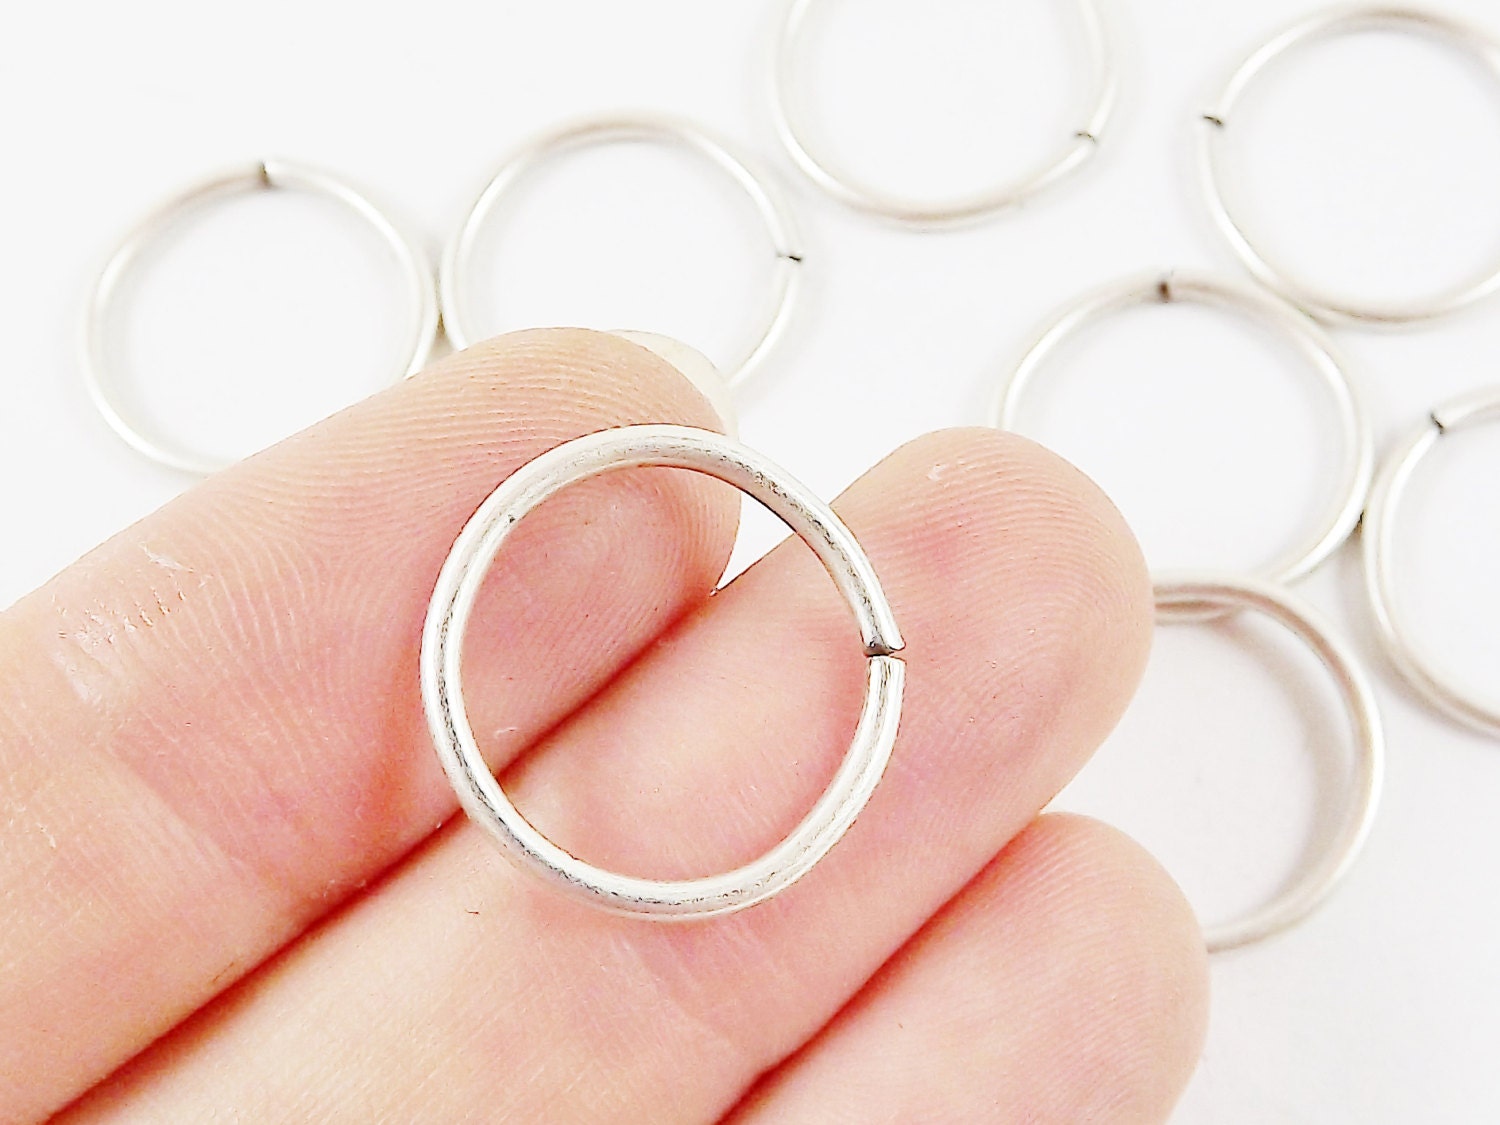 18mm Silver Jump Rings, Large Silver Jump Rings, Jumprings, Silver Jumprings, Silver Rings, Large Rings, Antique Matte Silver Plated- 8pcs